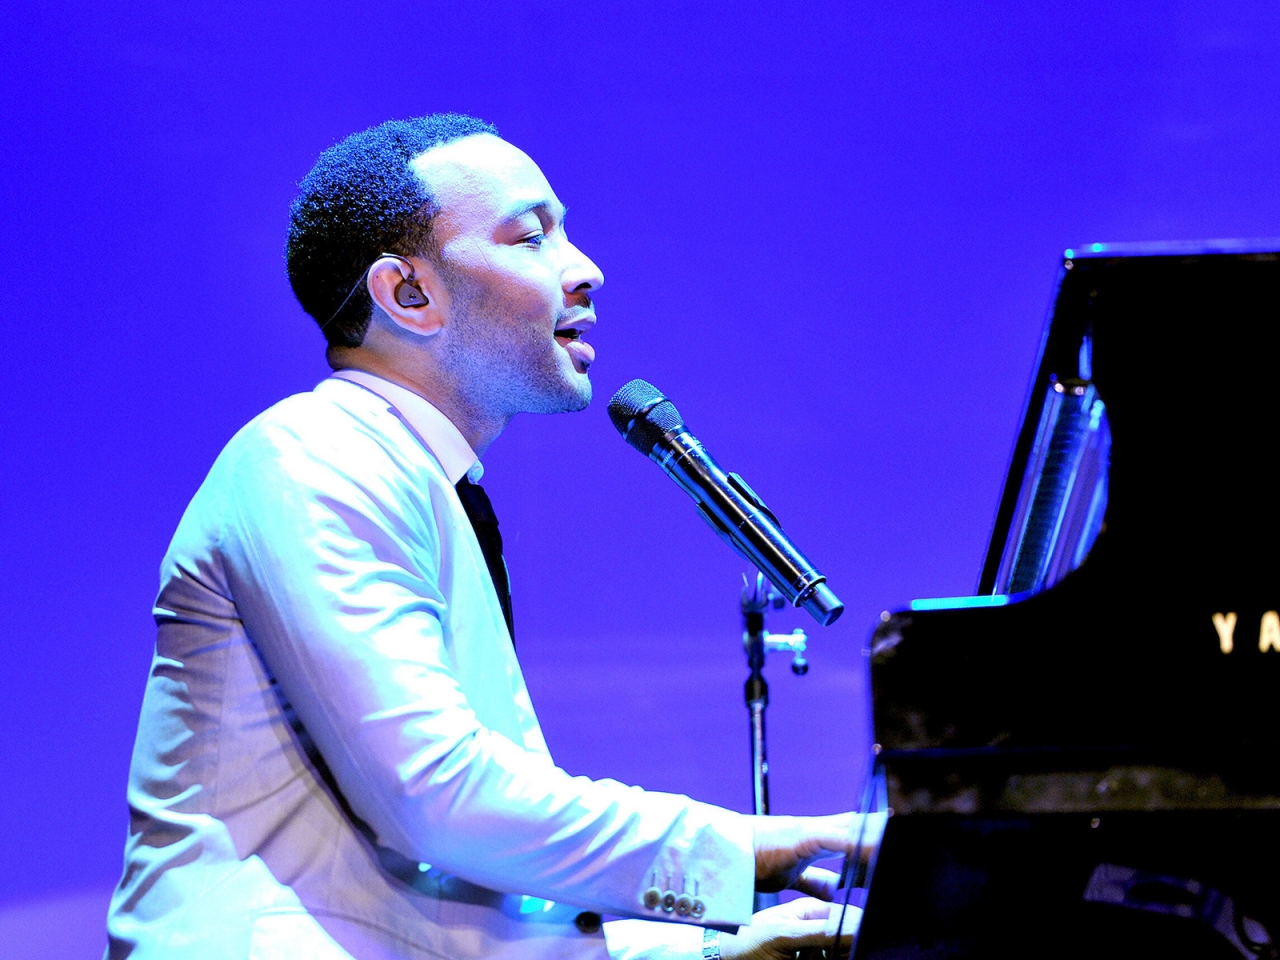 John Legend at Piano for 1280 x 960 resolution